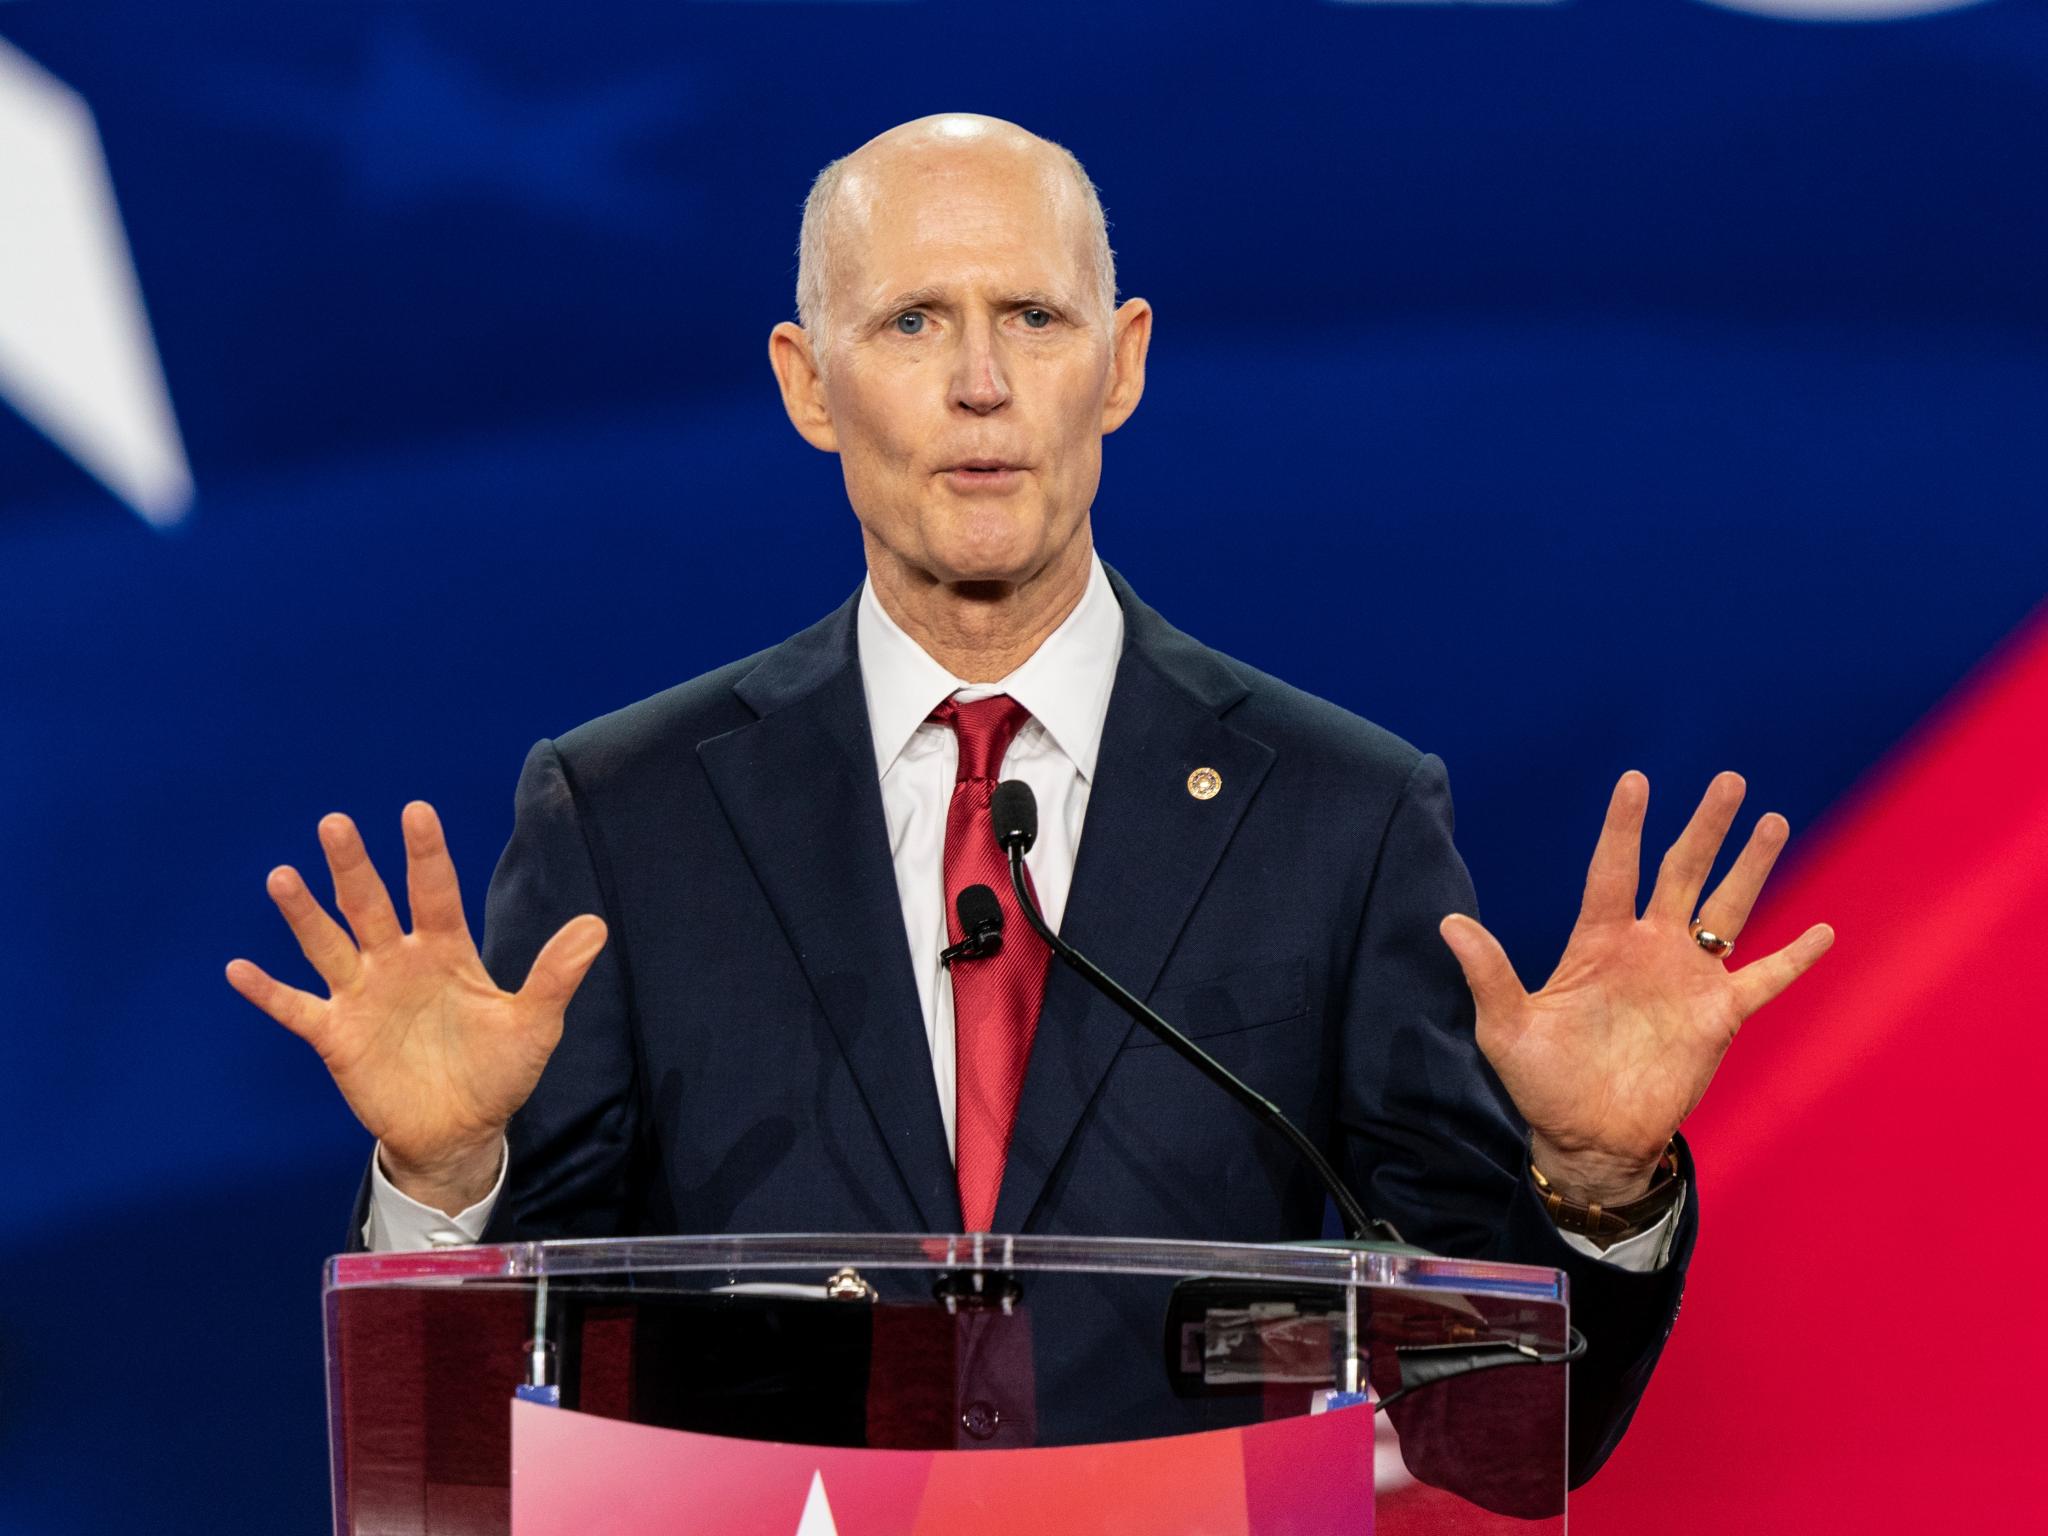  trumps-racist-slur-against-mcconnells-wife-brushed-aside-by-rick-scott-he-likes-to-give-nicknames 